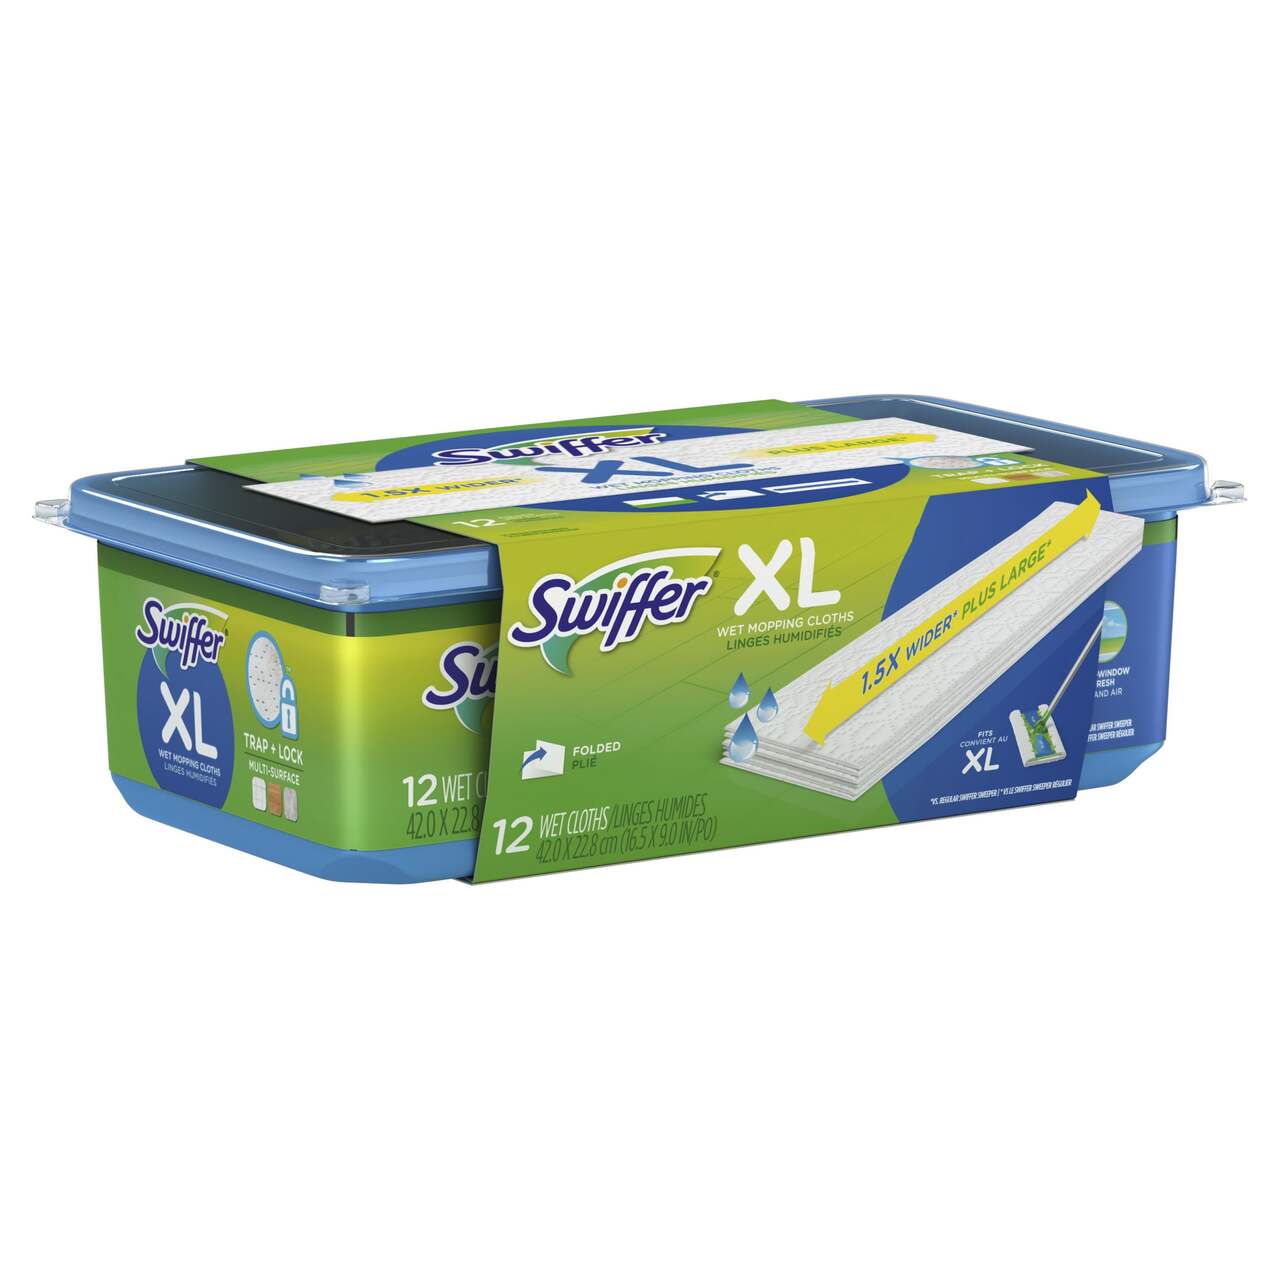 https://media-www.canadiantire.ca/product/living/cleaning/household-cleaning-tools/1423899/-swiffer-extra-large-wet-12ct-refill--3b9f24b1-5f58-4795-89d6-d5fc638ff821-jpgrendition.jpg?imdensity=1&imwidth=1244&impolicy=mZoom